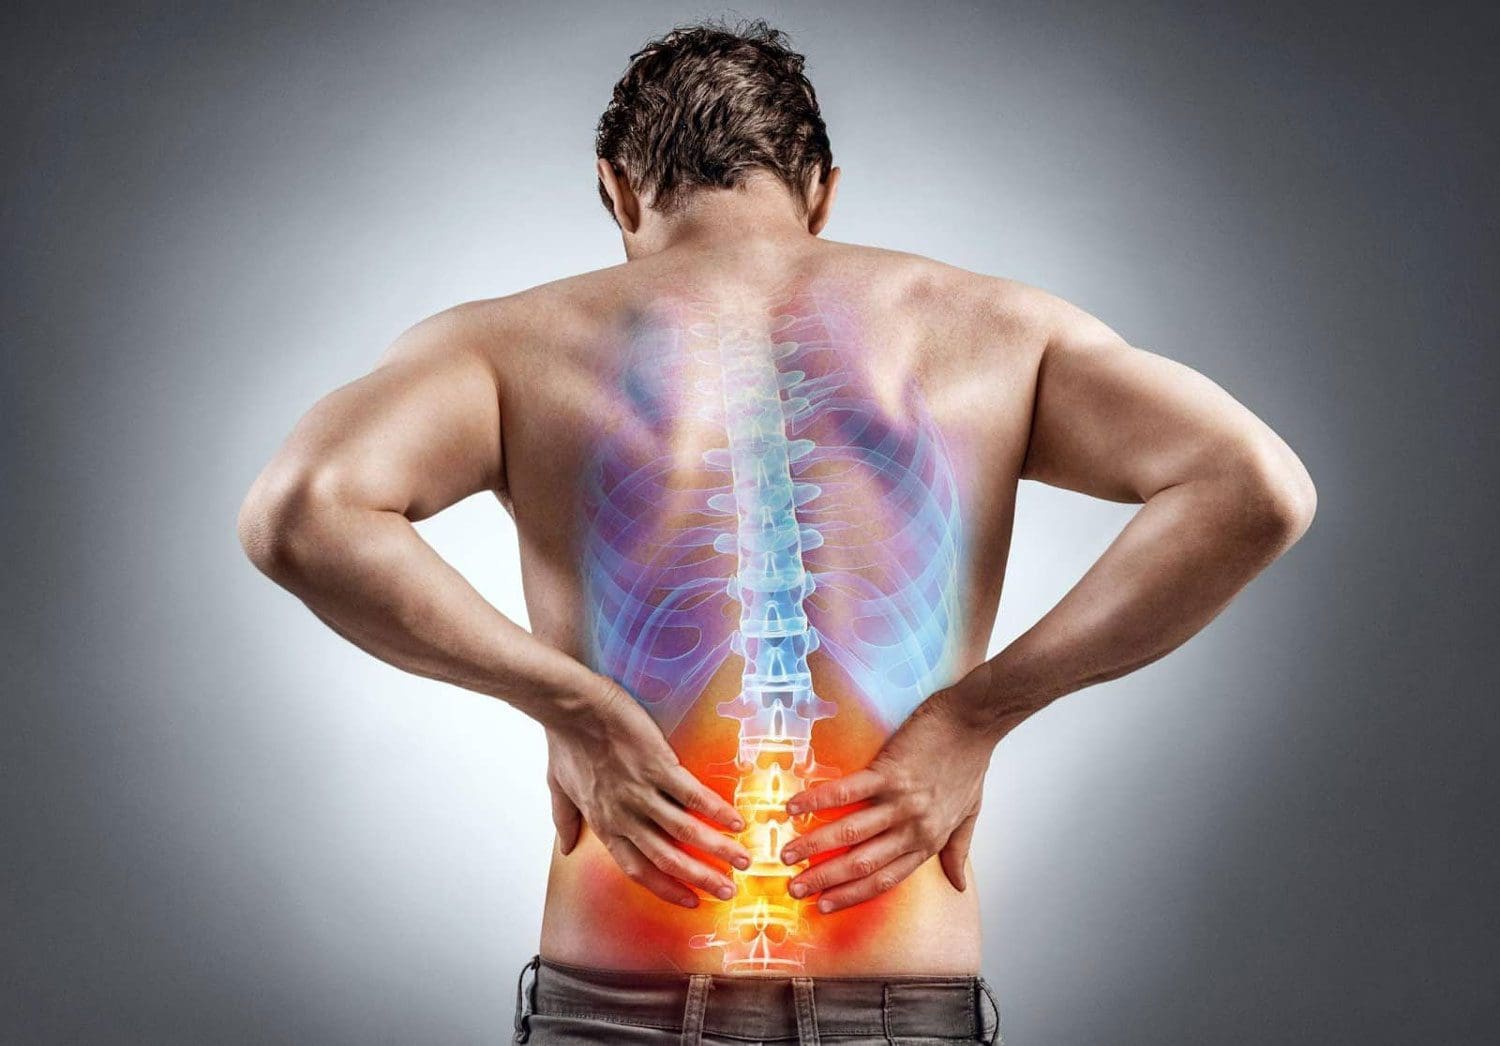 An image of the spine is transposed on top of a photograph of a man's back, to show how causes of back pain.